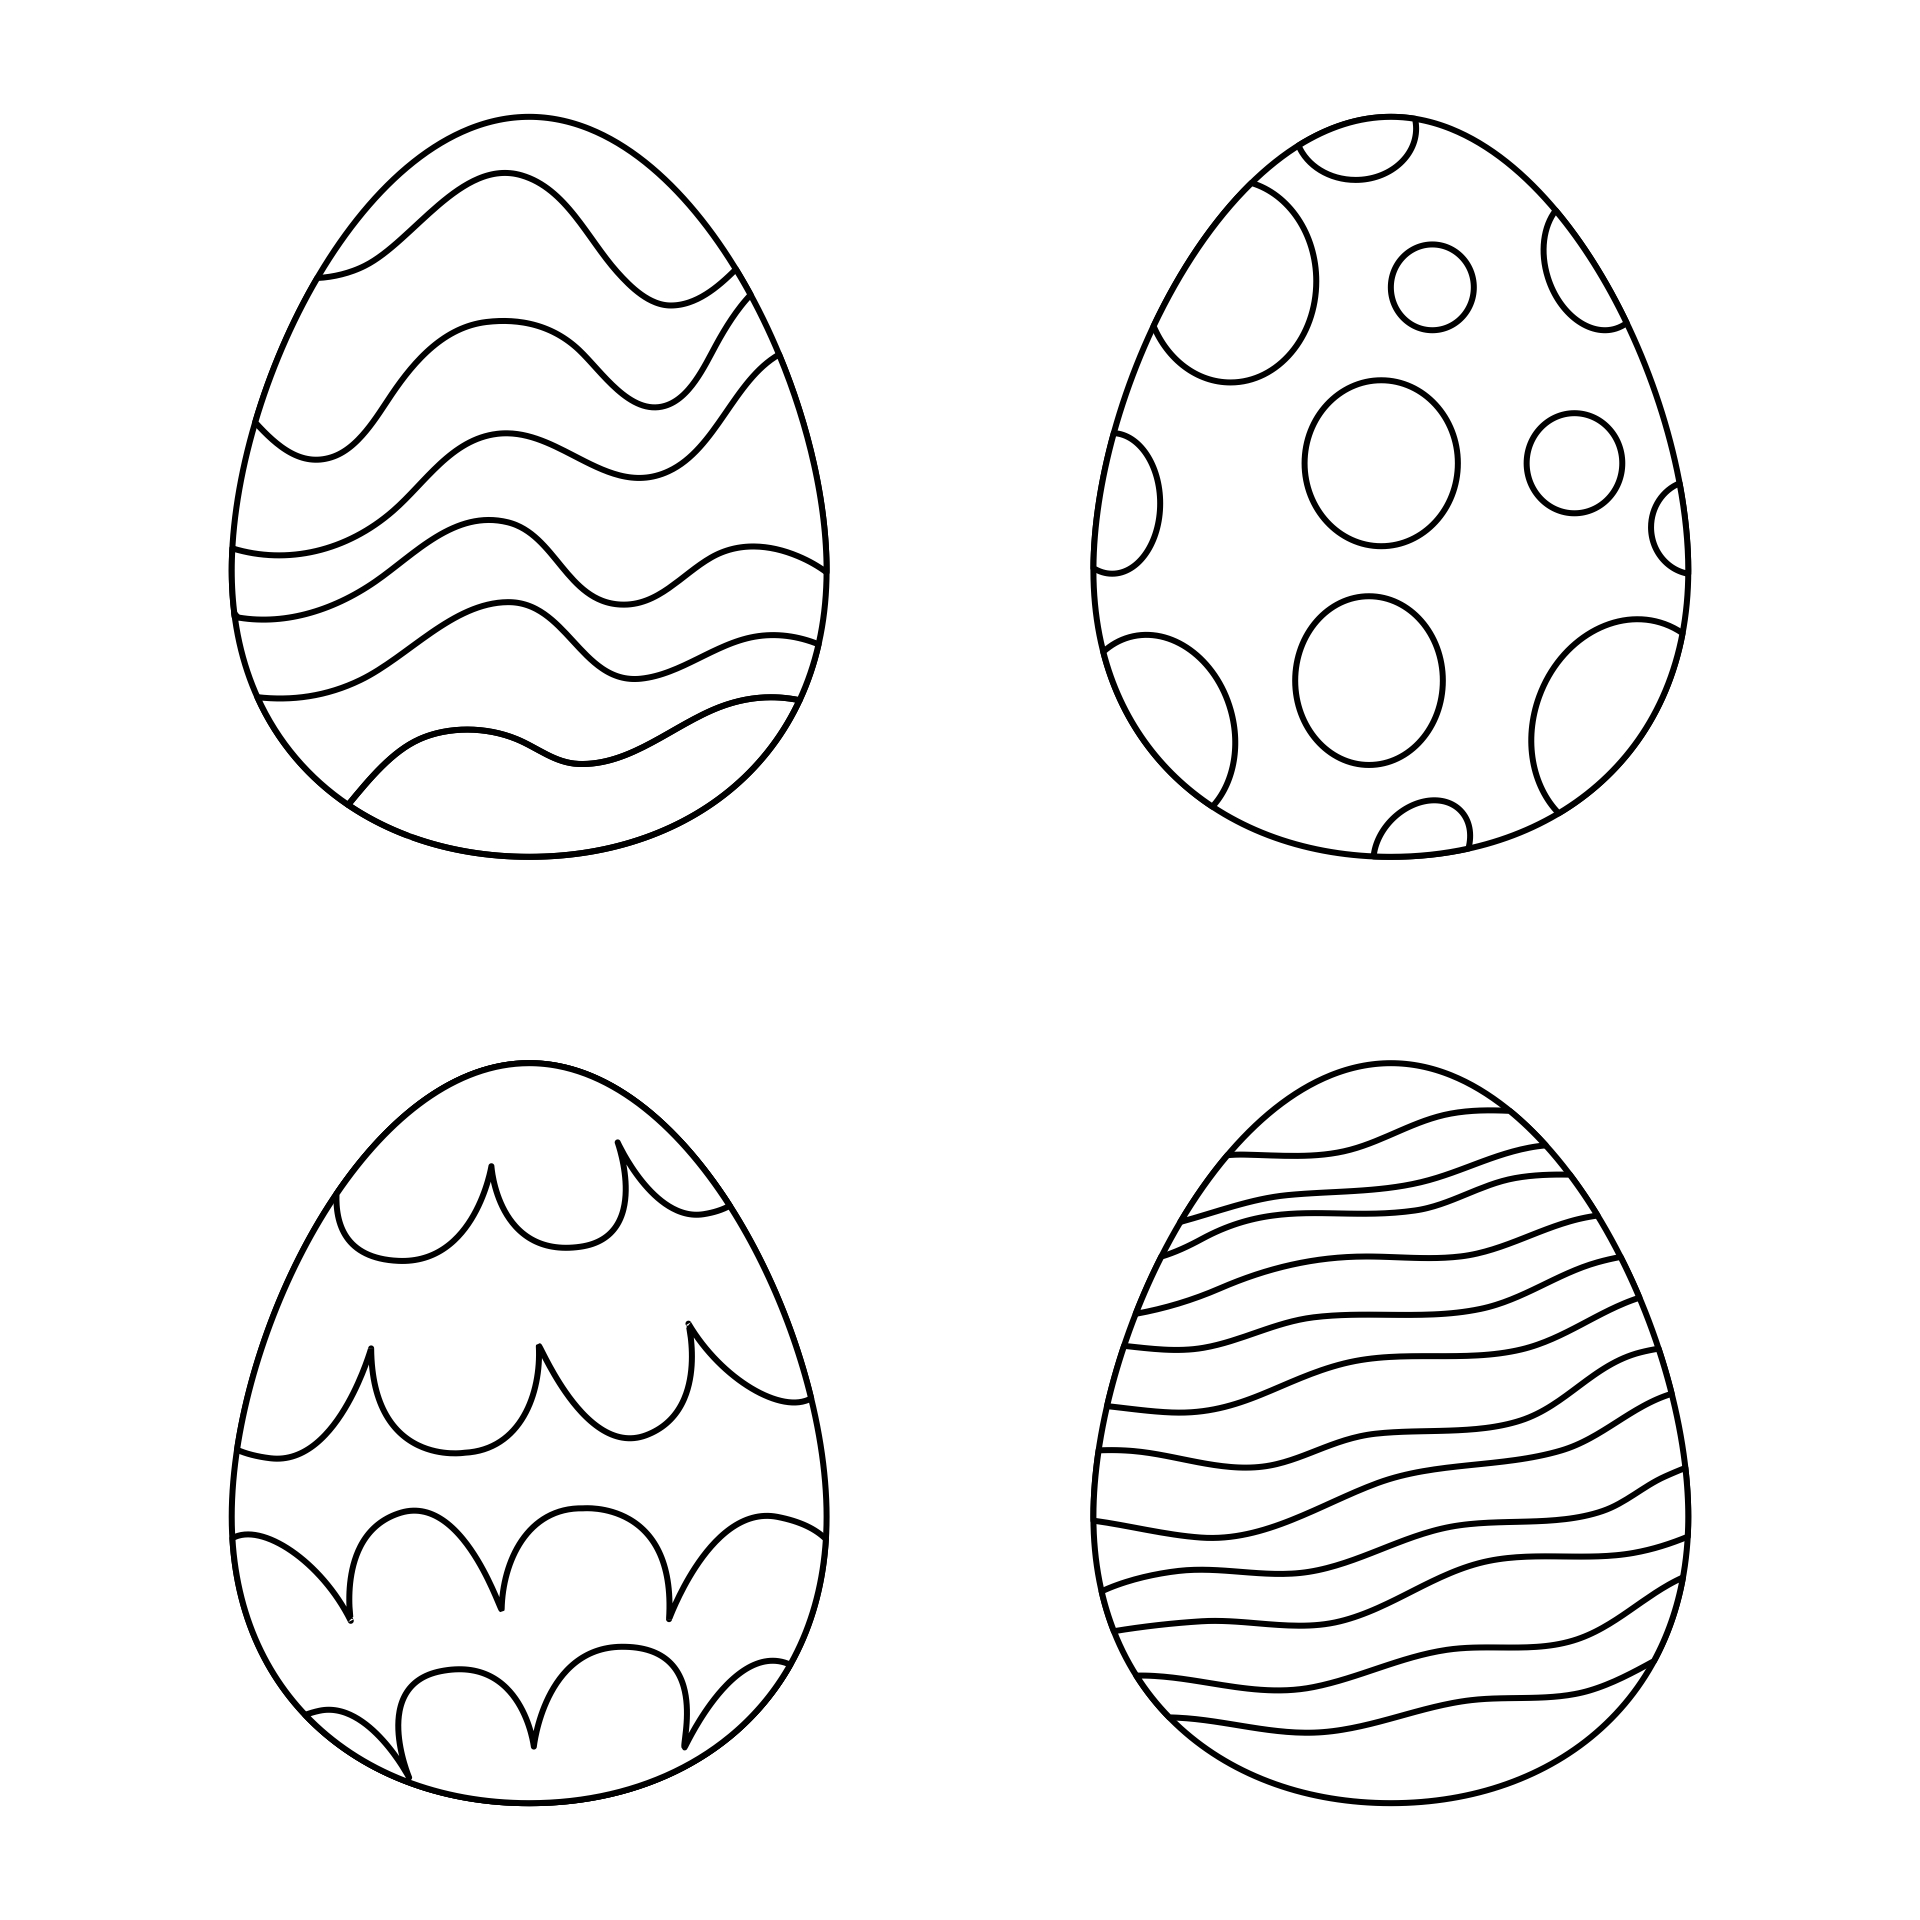 6 Best Images of Free Easter Printable Craft Templates Easter